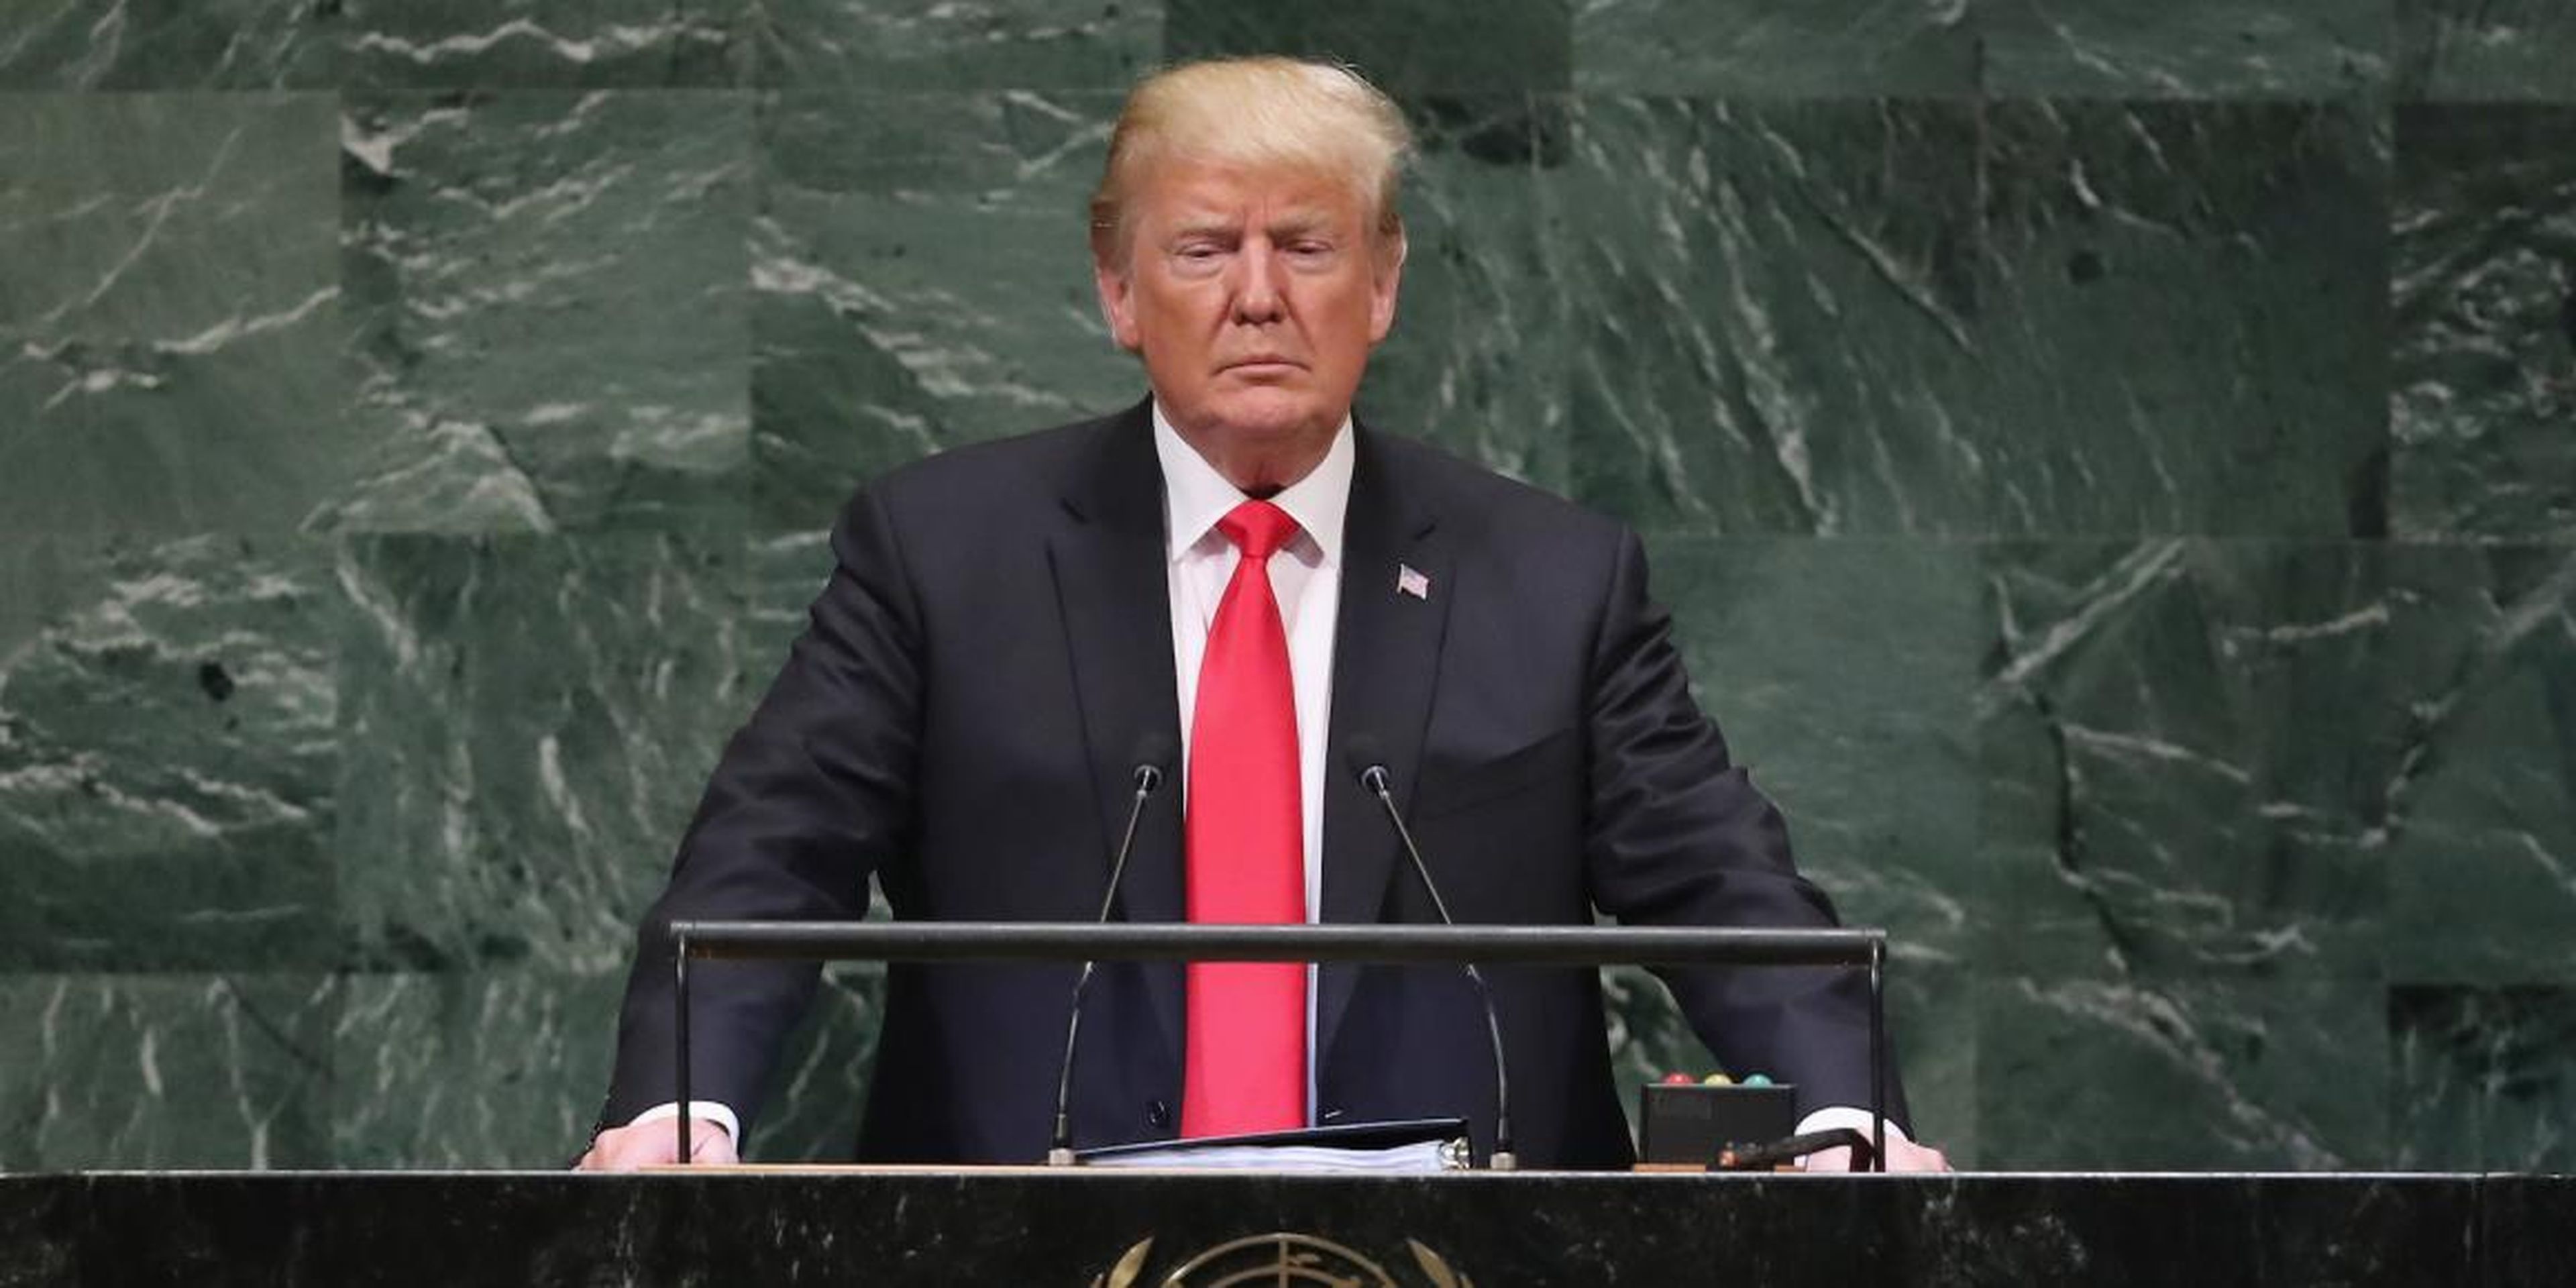 World leaders laughed at President Donald Trump during his remarks at the UN General Assembly in New York on Tuesday.